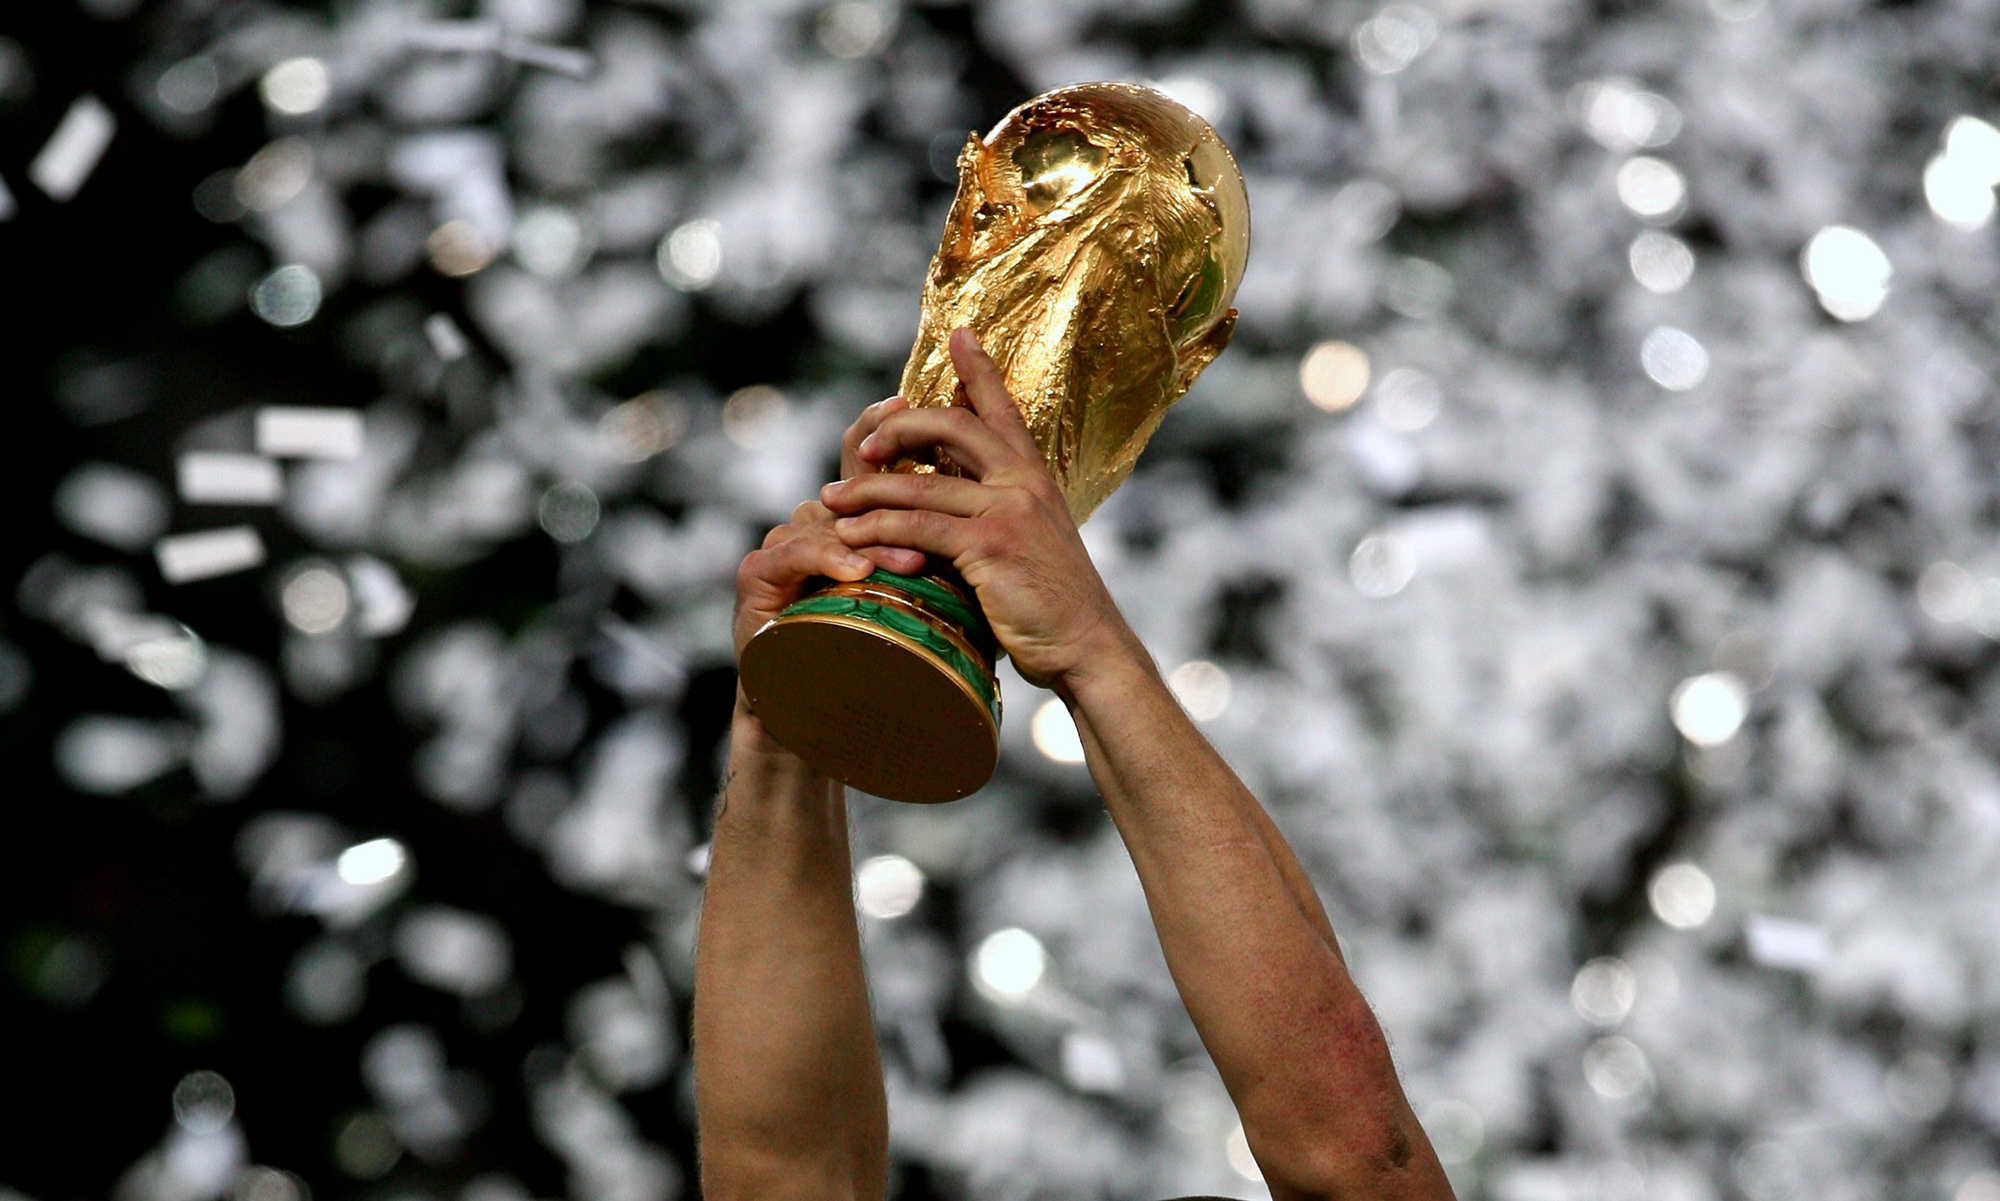 Highlights: The FIFA Soccer World Cup's Impact On Retail